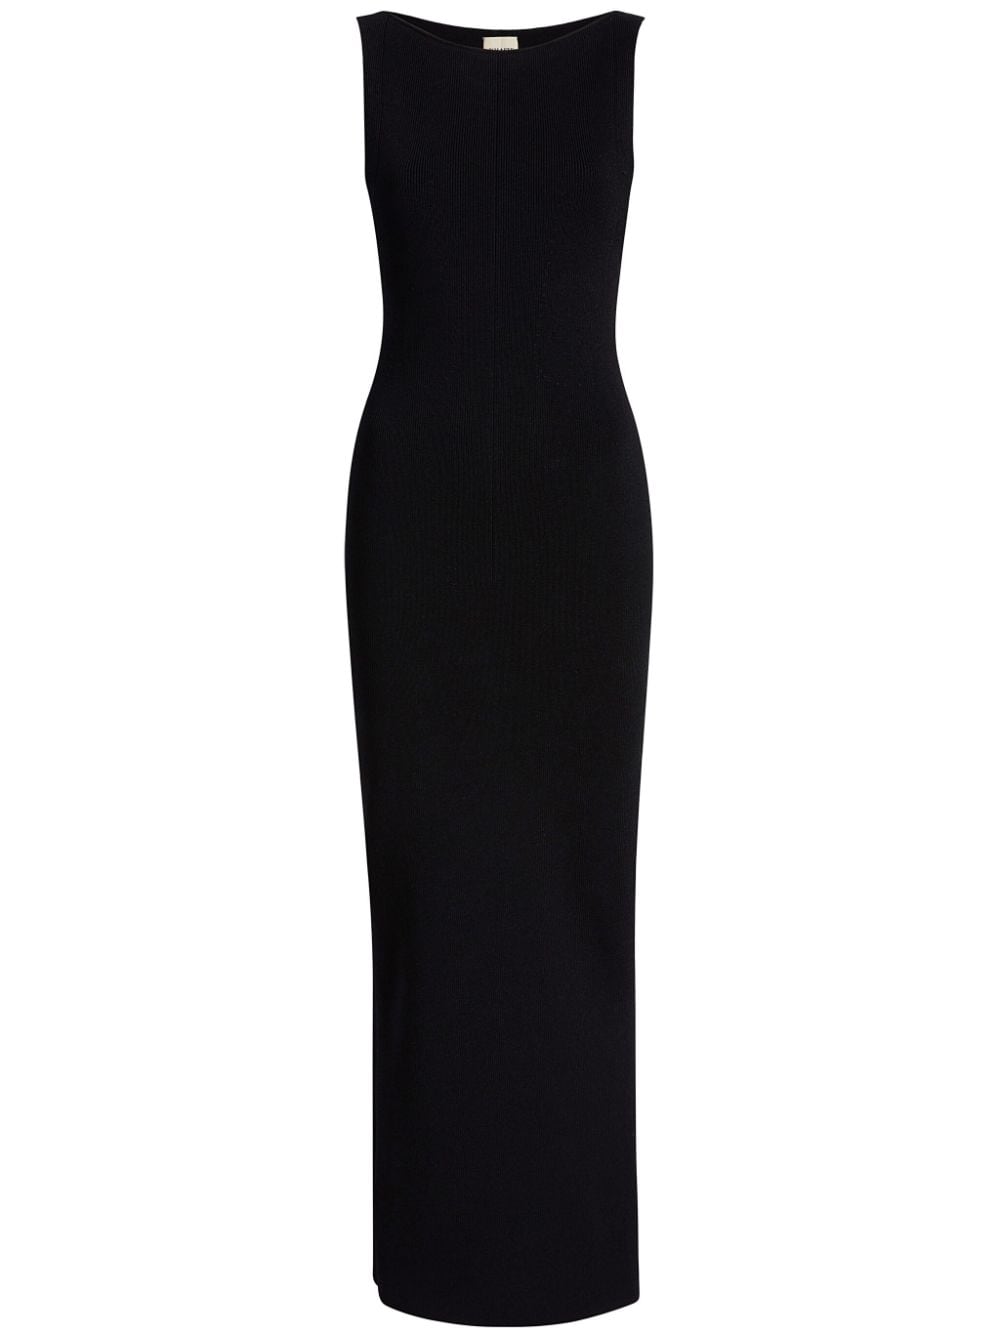 The Evelyn maxi dress